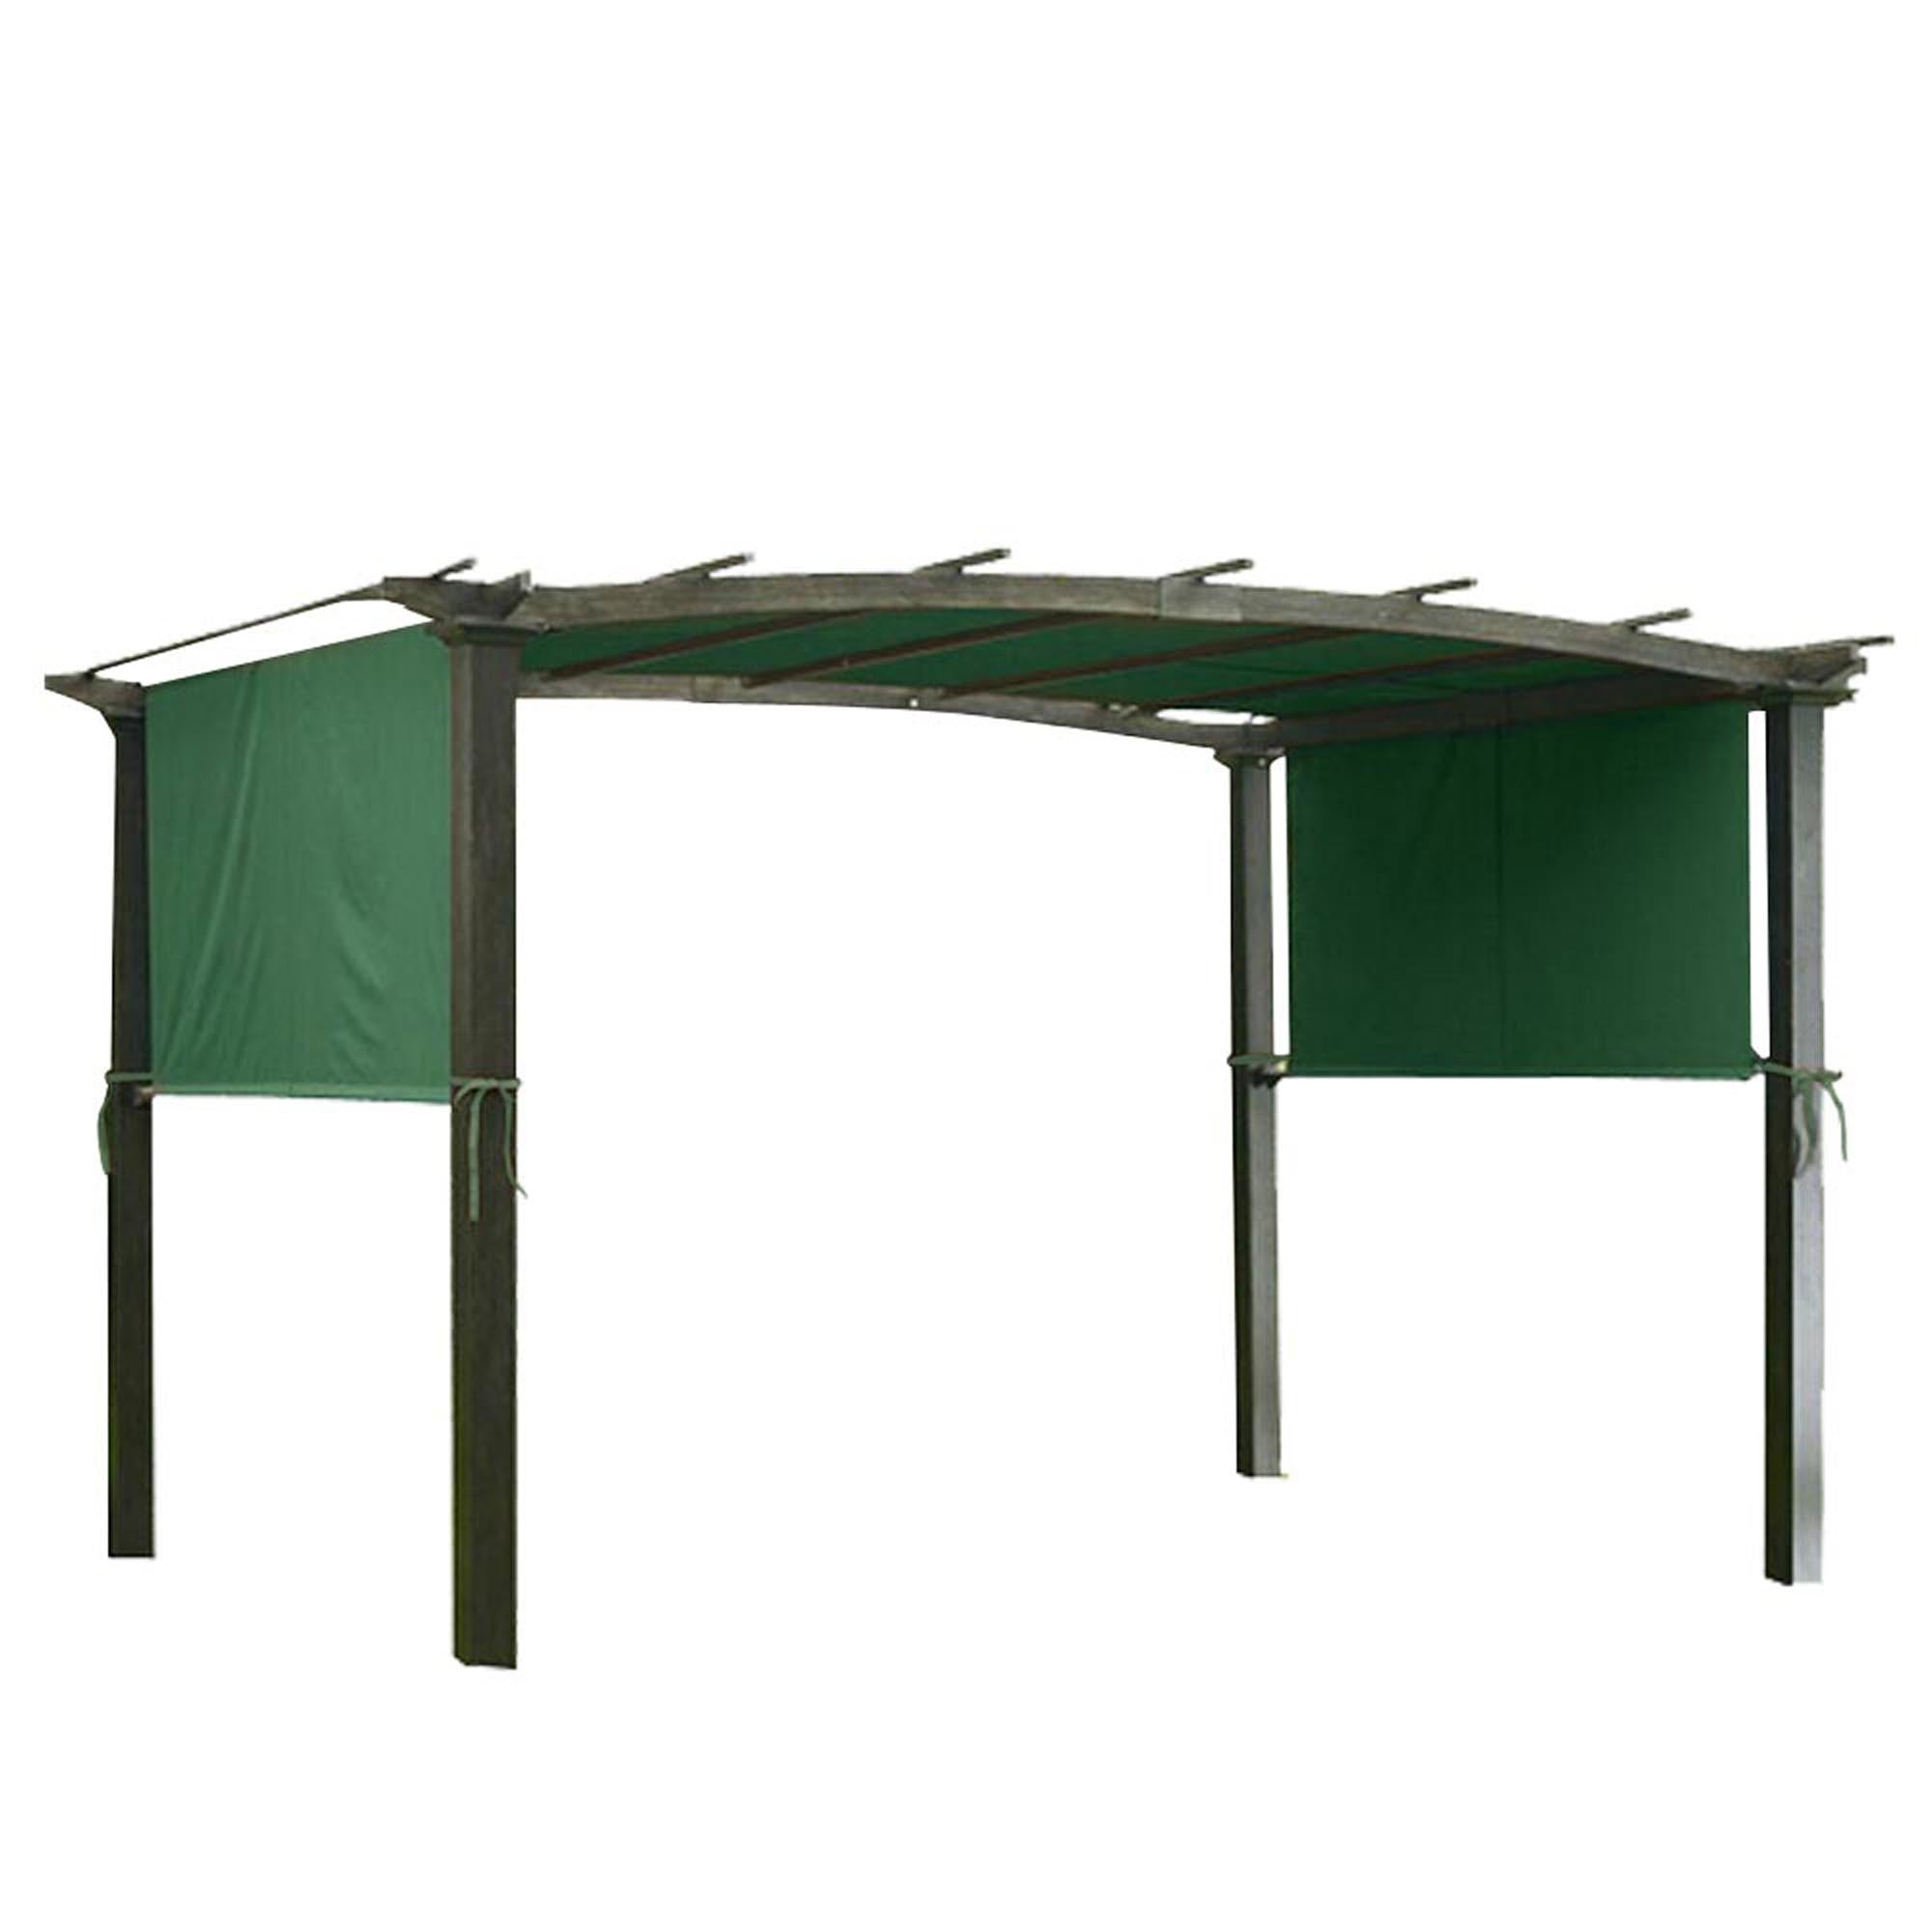 17×6.5Ft Pergola Canopy Replacement Cover Green